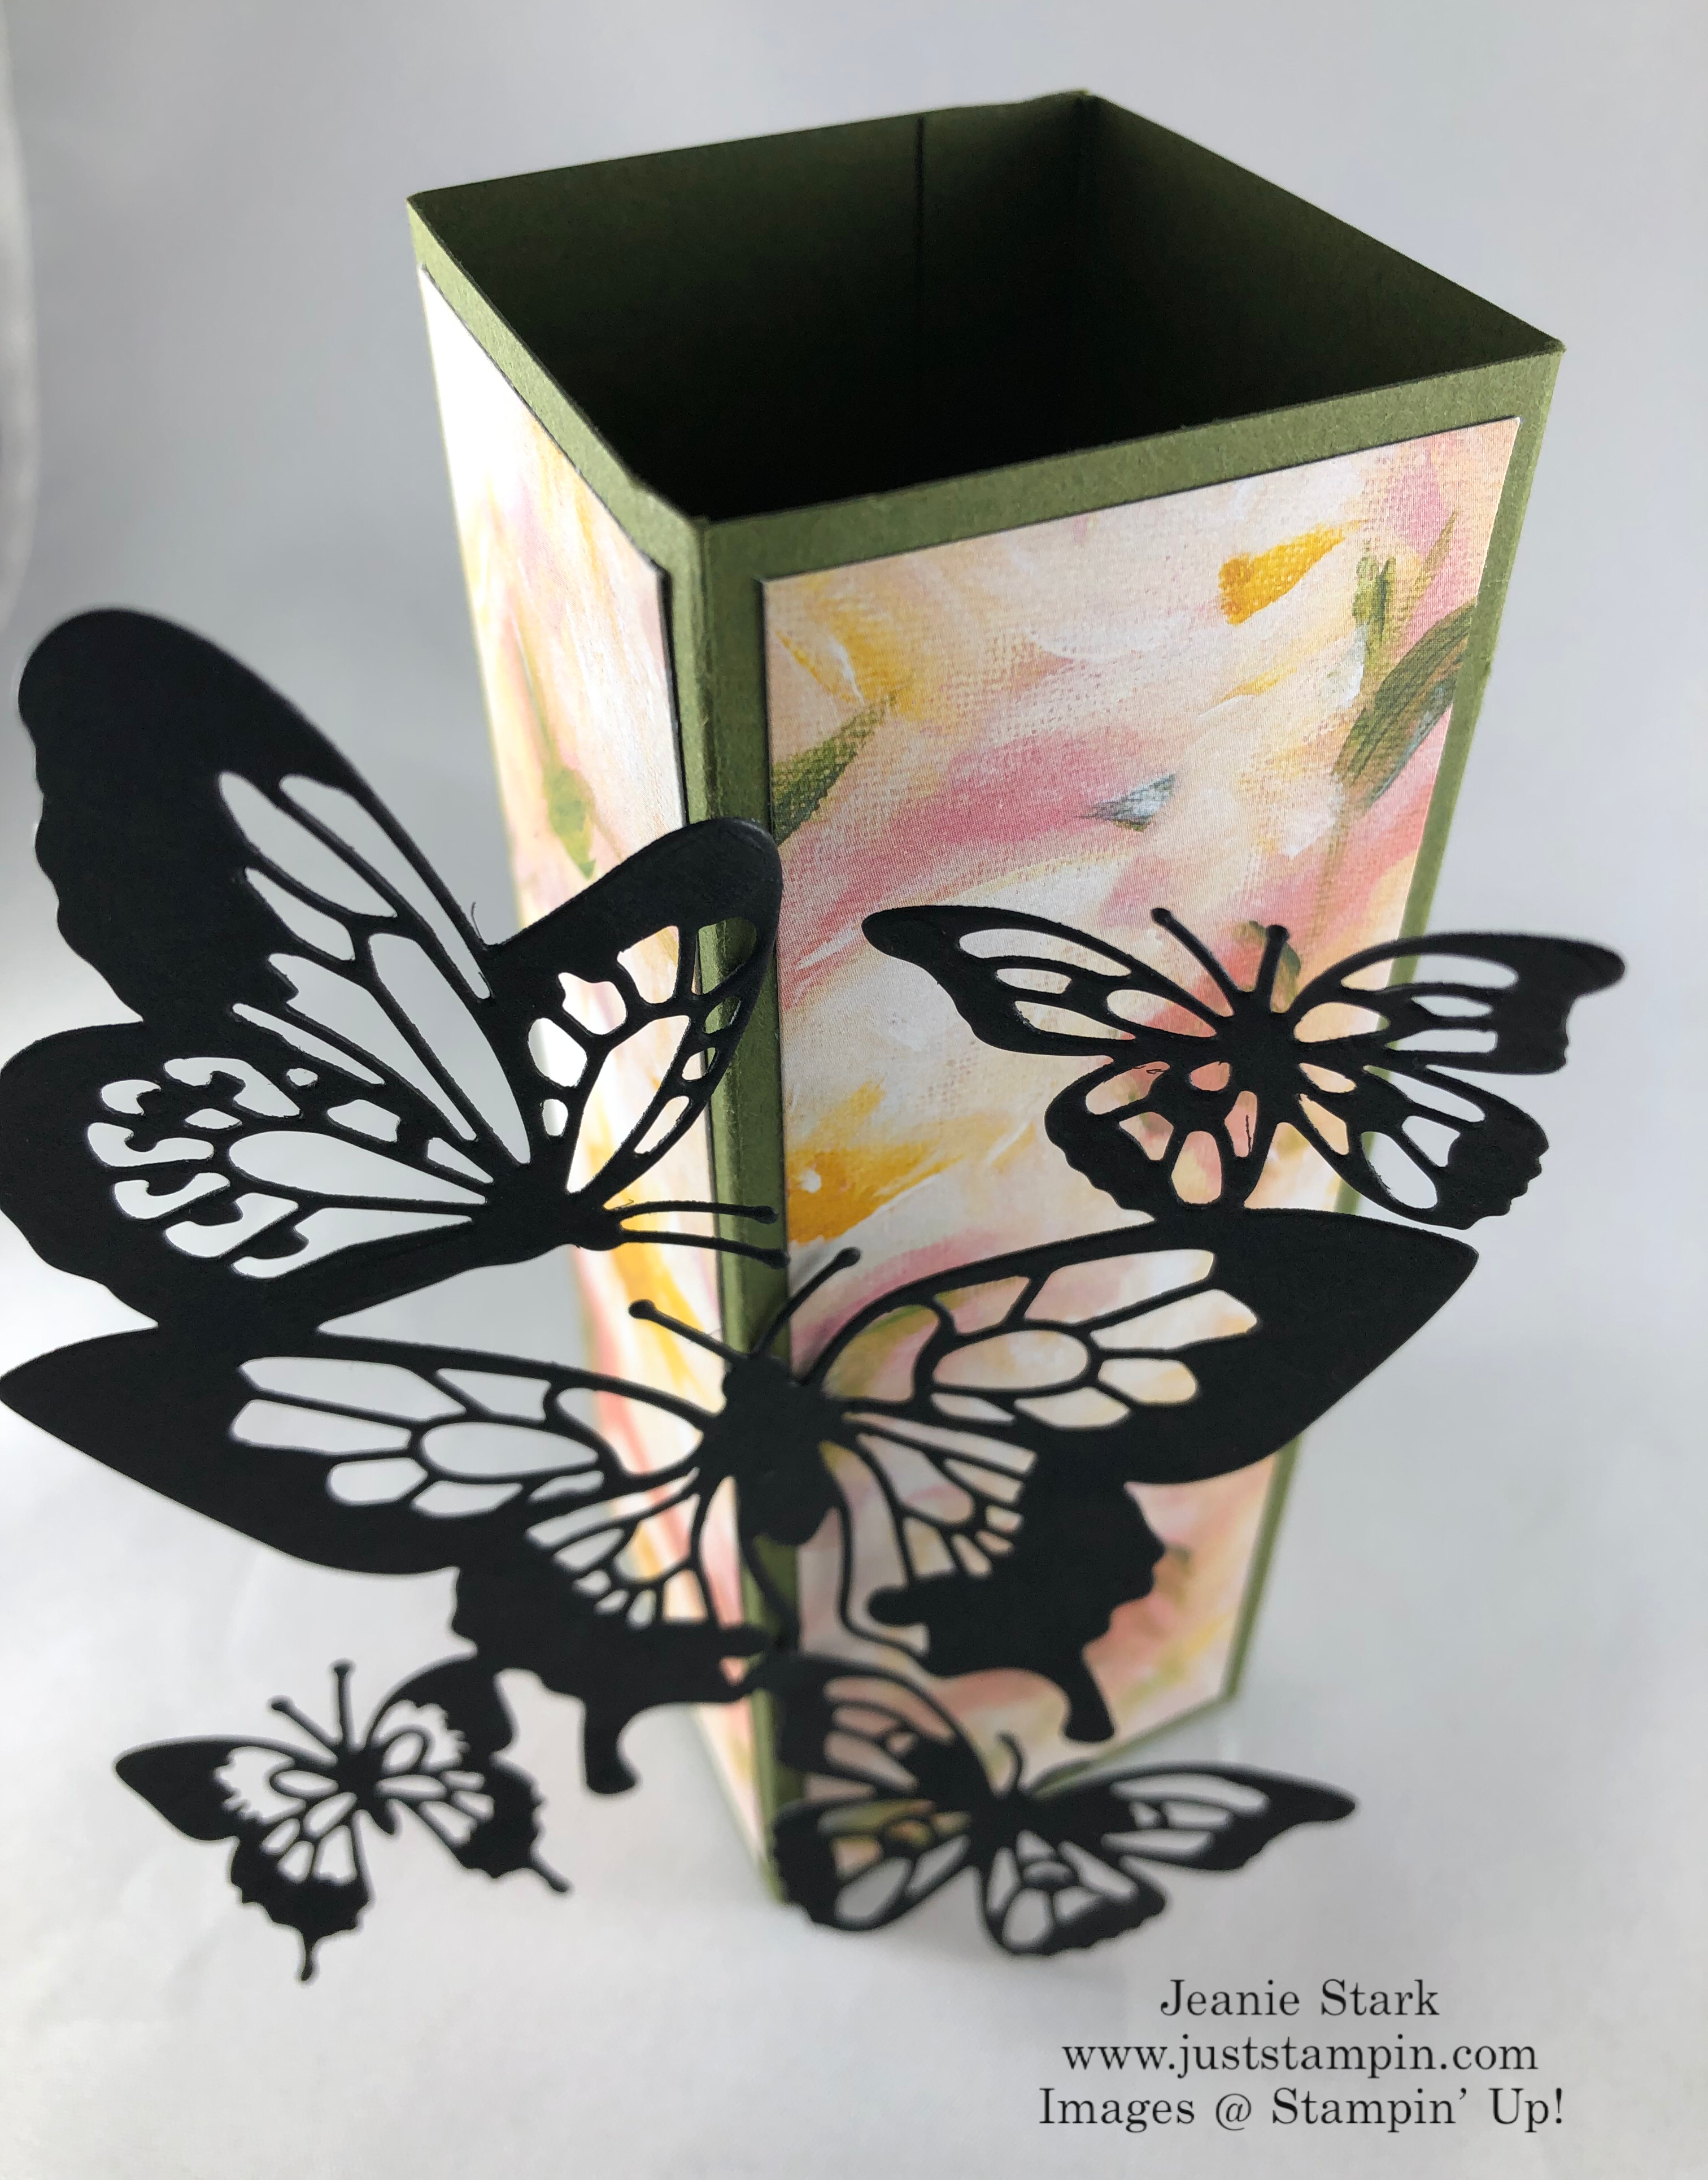 Stampin' Up! Butterfly Beauty and Perennial Essence fun fold box card idea for a friend - Jeanie Stark StampinUp